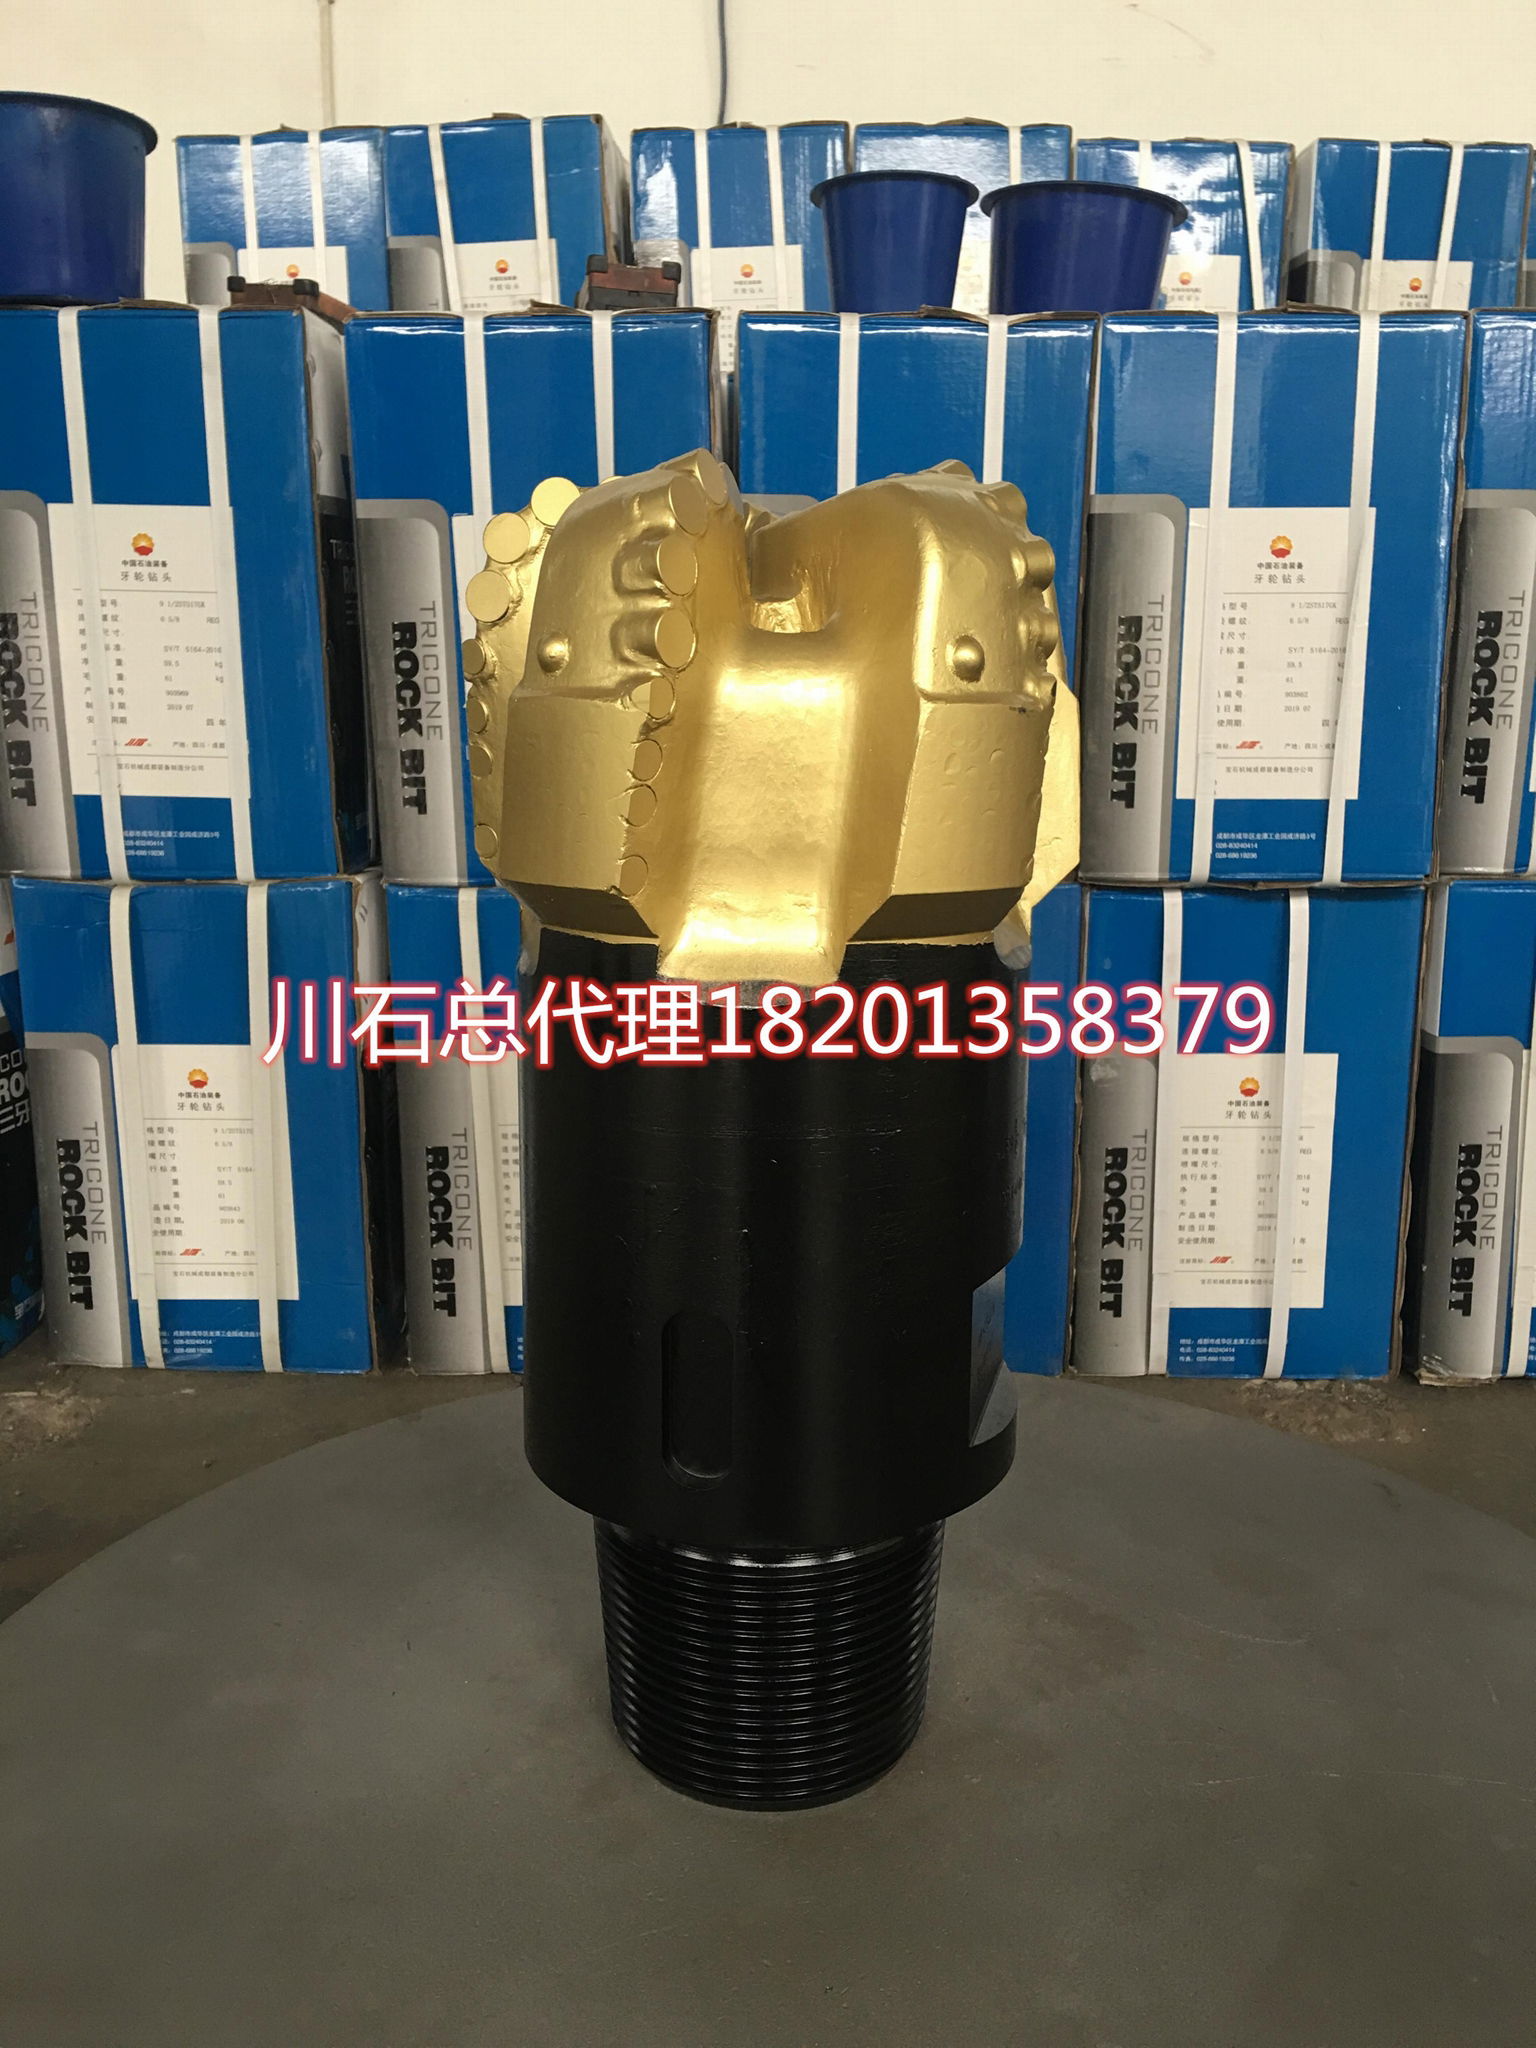 Manufacturer Price Api 8 1/2" Pdc Drill Bit For Oil Drilling Tool 